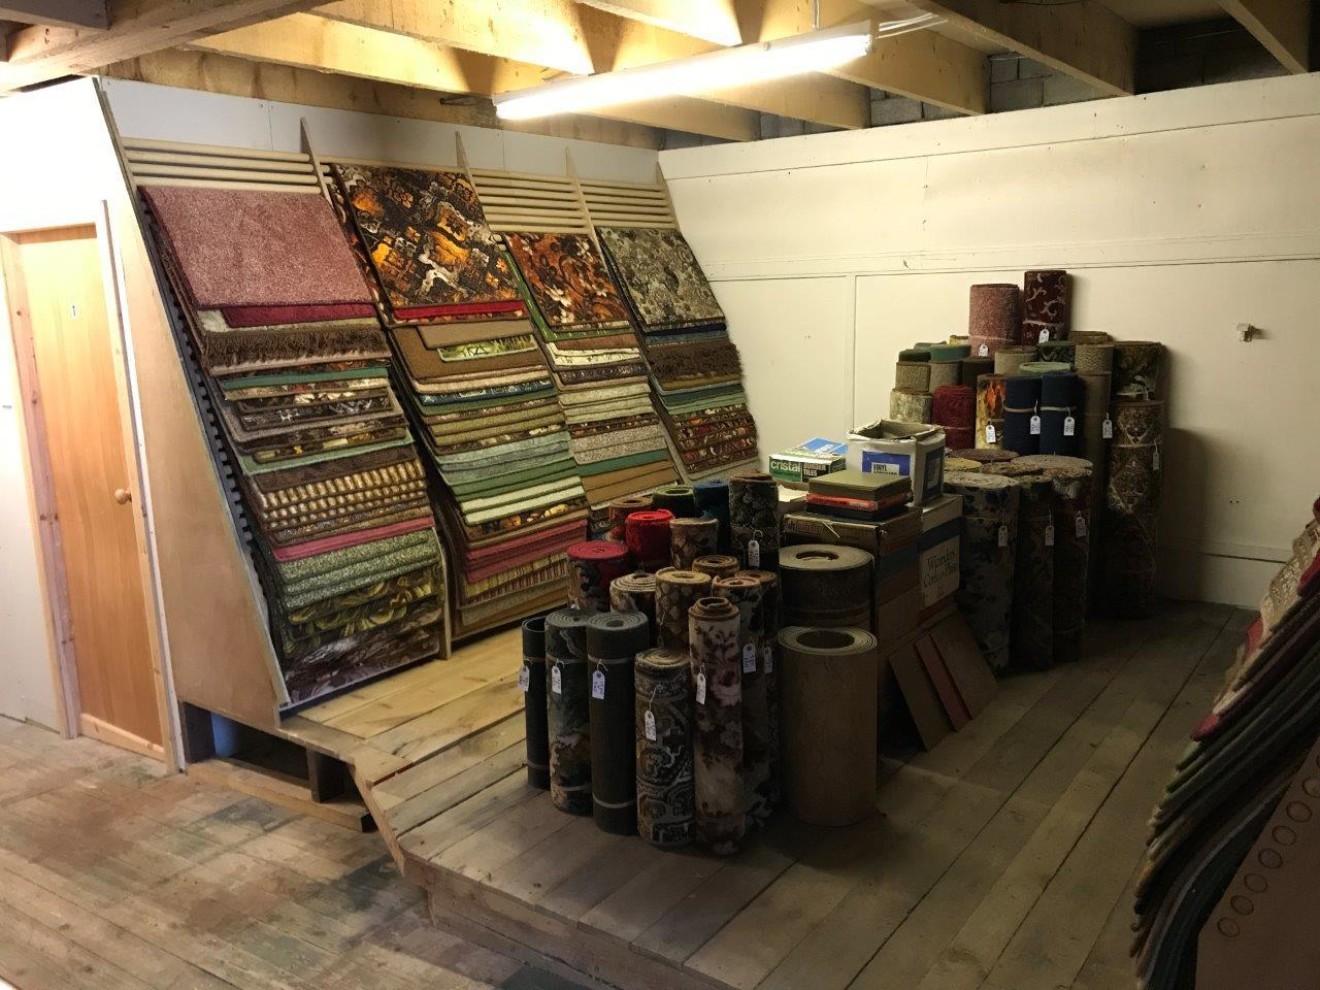 Various Vintage Rugs made from Carpet Remnants, Mix of Hessian and Foam Backed